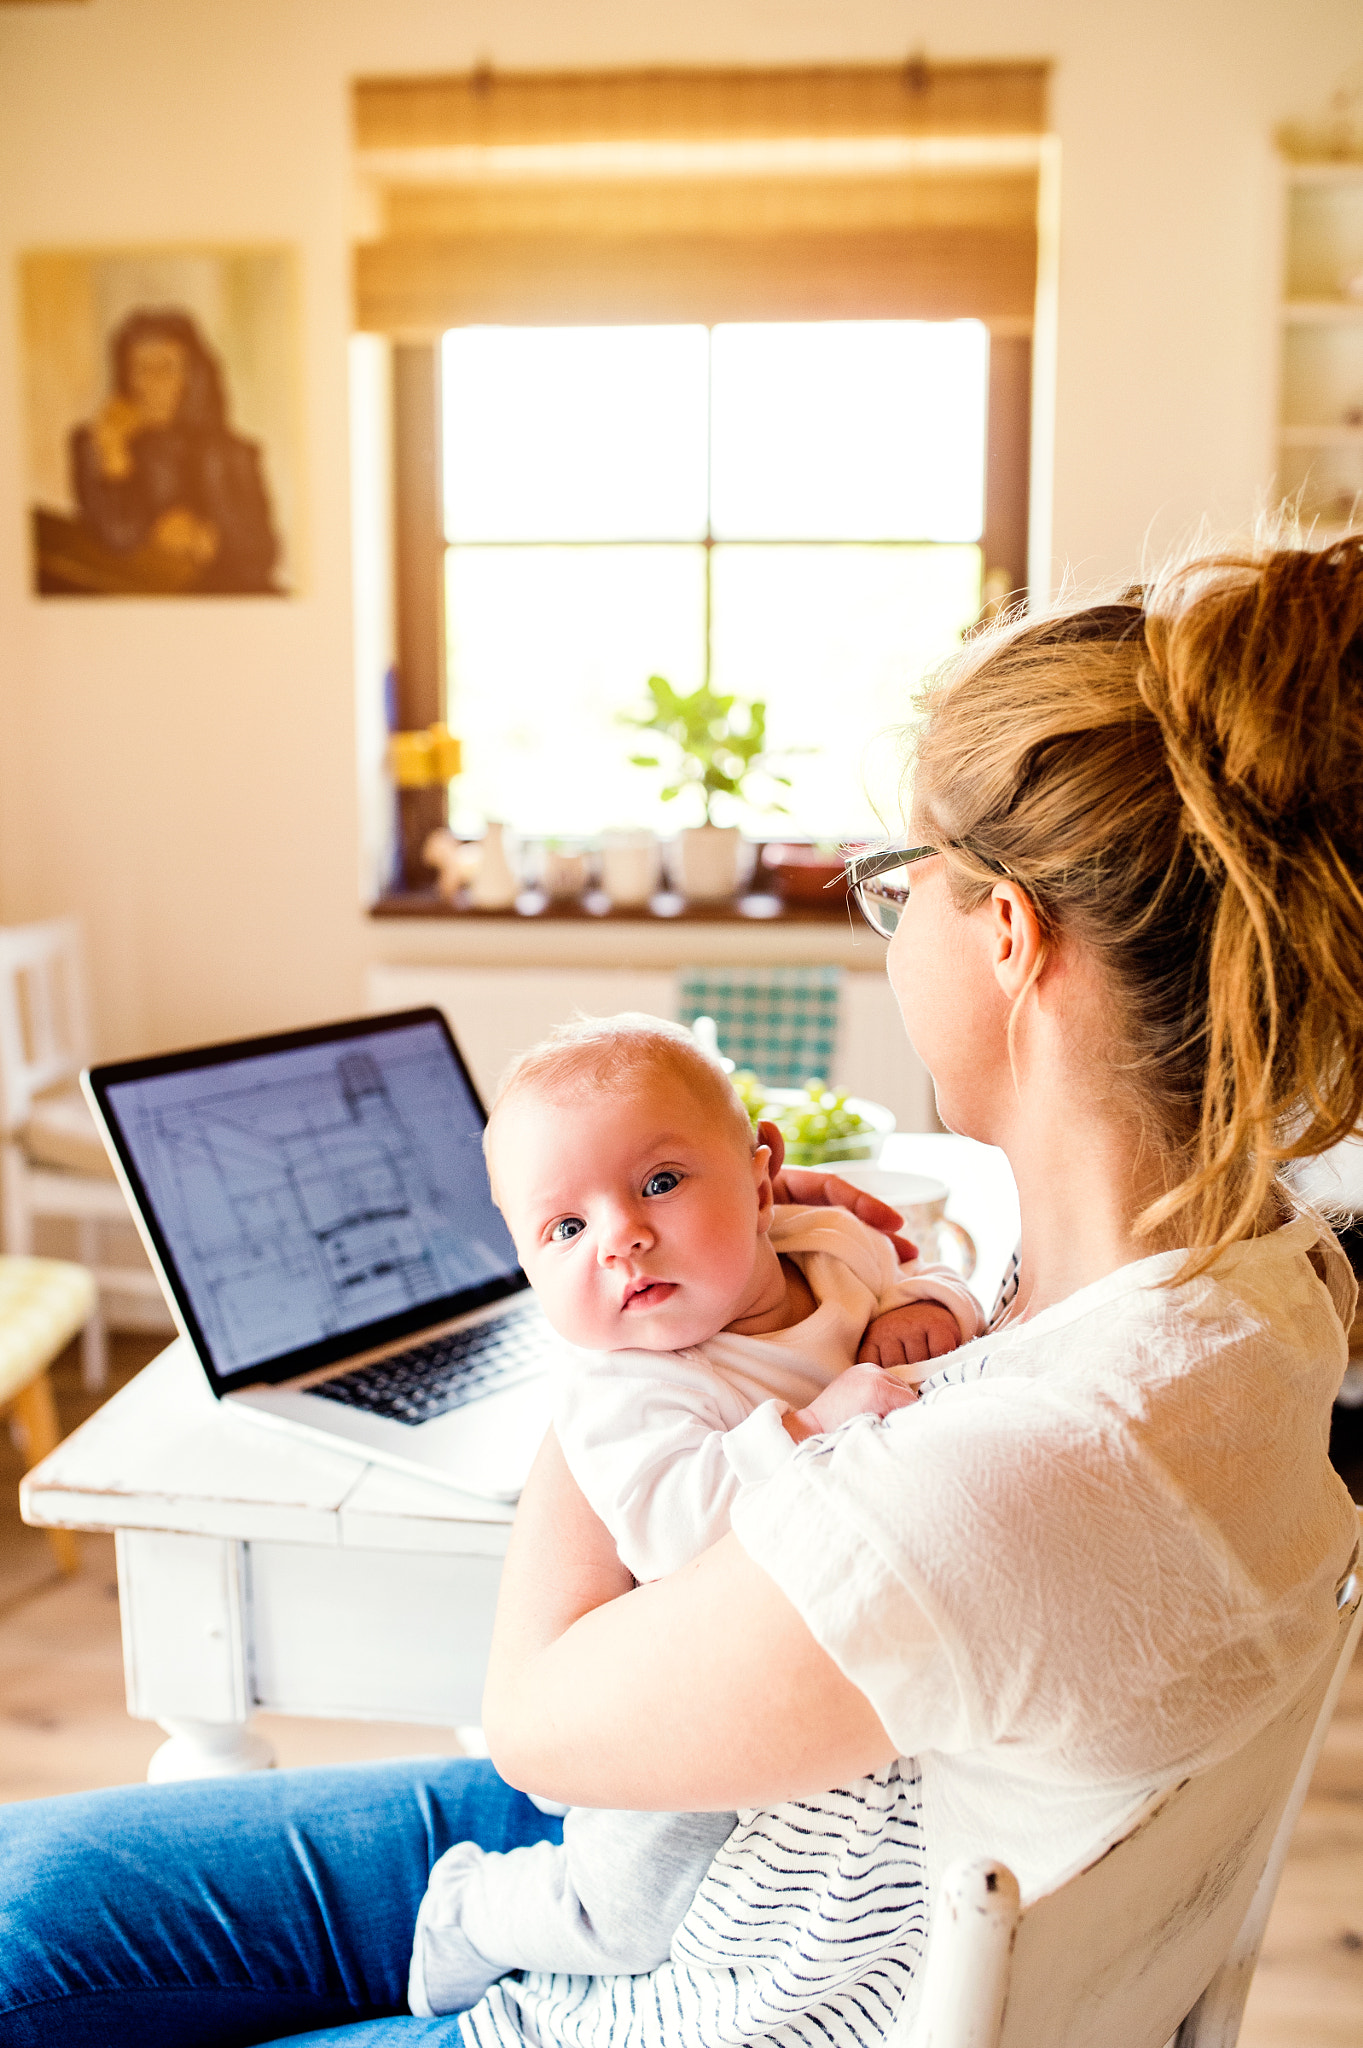 Nikon D4S + Sigma 35mm F1.4 DG HSM Art sample photo. Beautiful mother holding baby son, laptop on table, close up photography